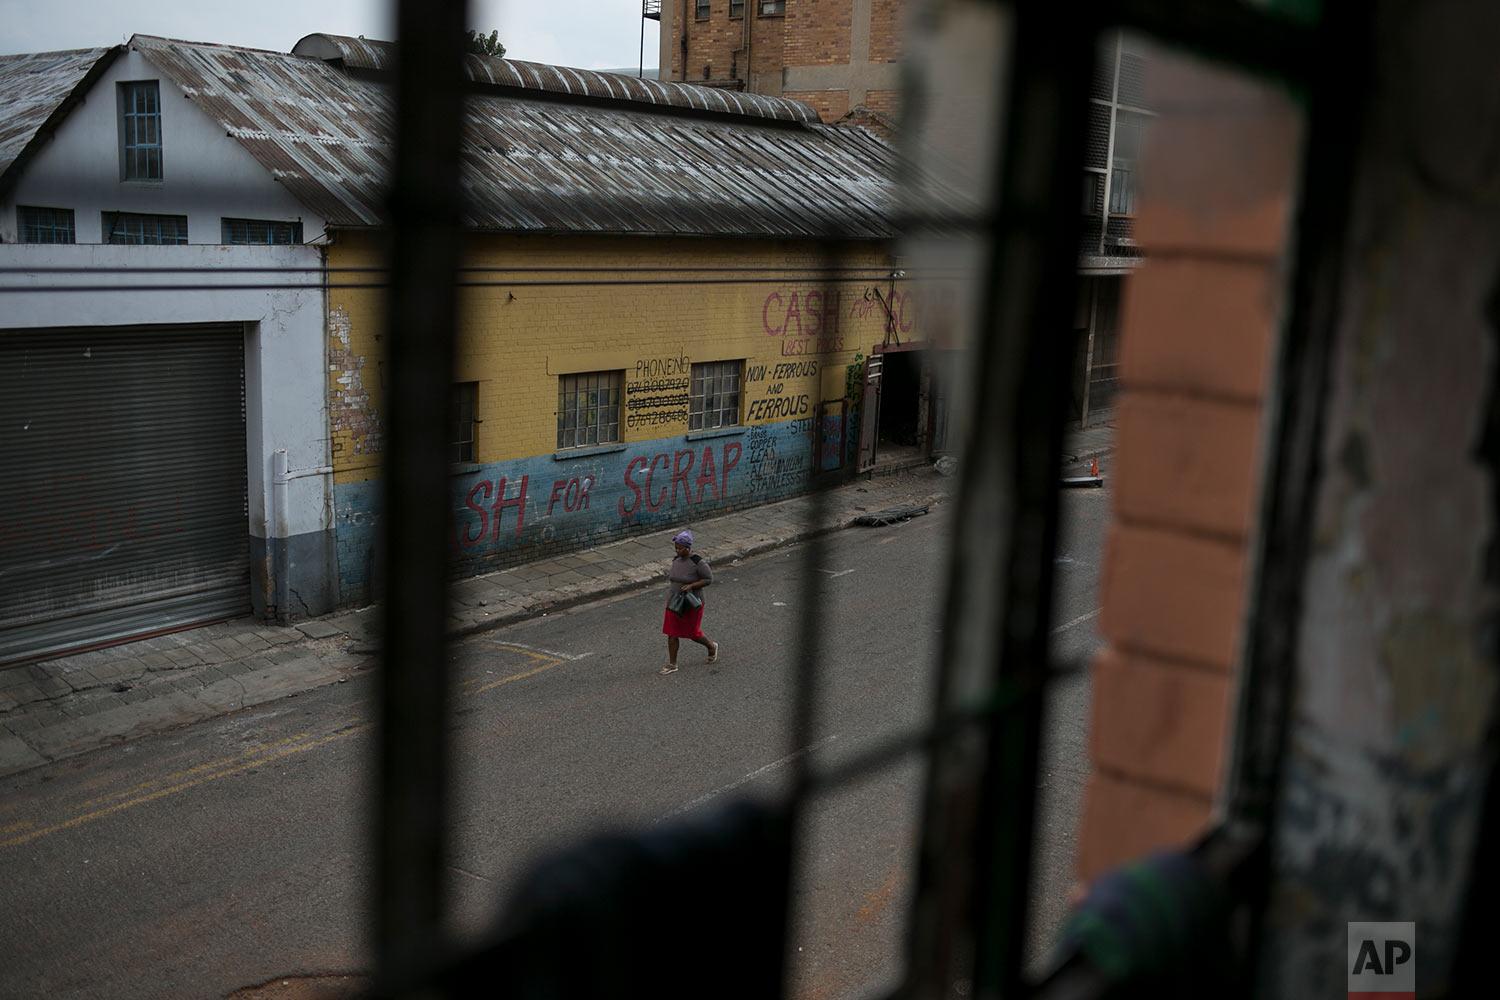  A woman walks past an abandoned building occupied by squatters. March 30, 2018. (AP Photo/Bram Janssen) 